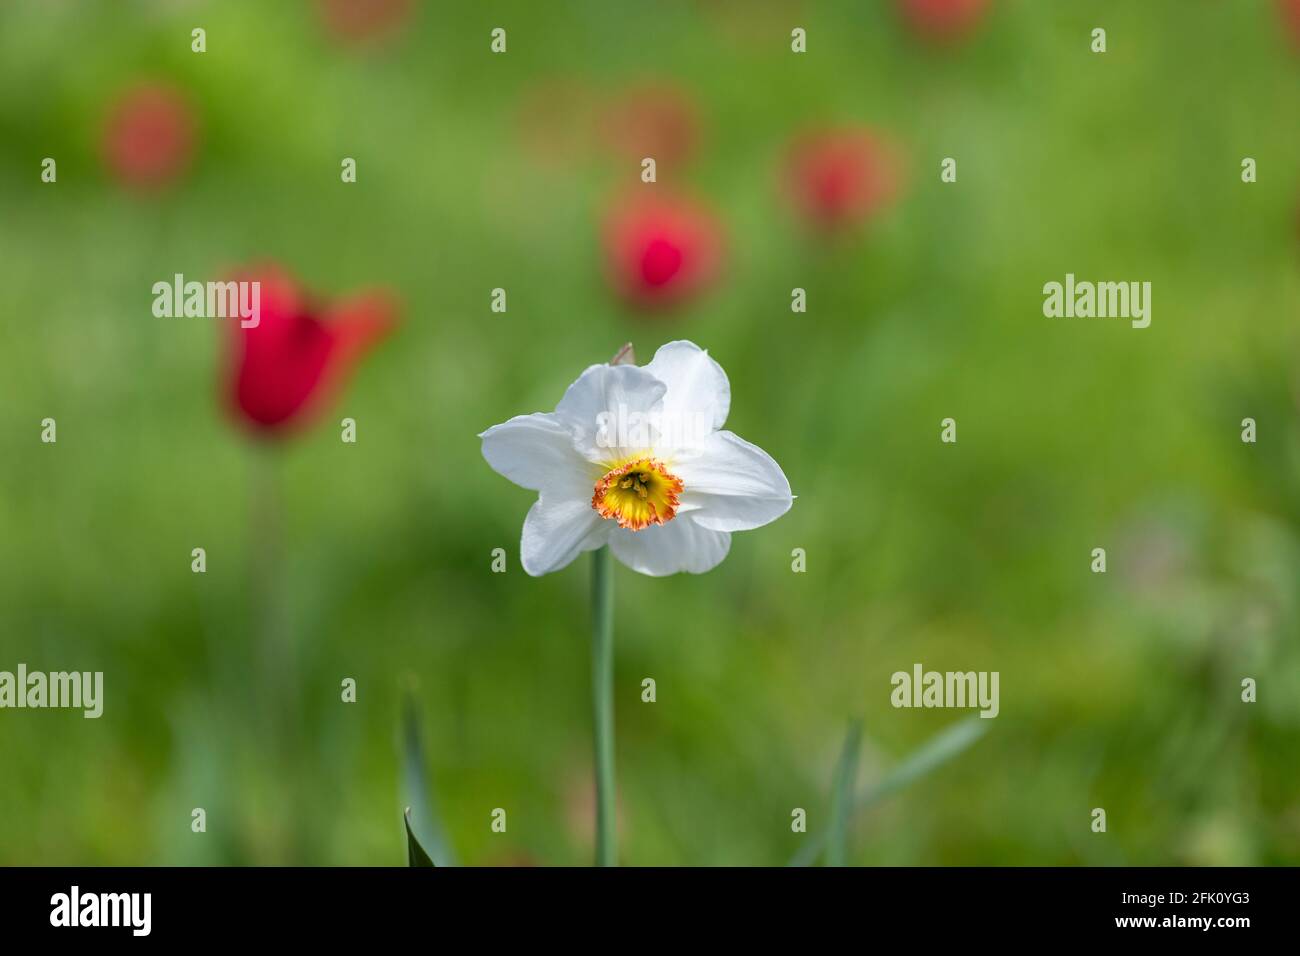 Close up of a single white Narcissus flowering during spring in a UK garden, against a blurred green background. Stock Photo